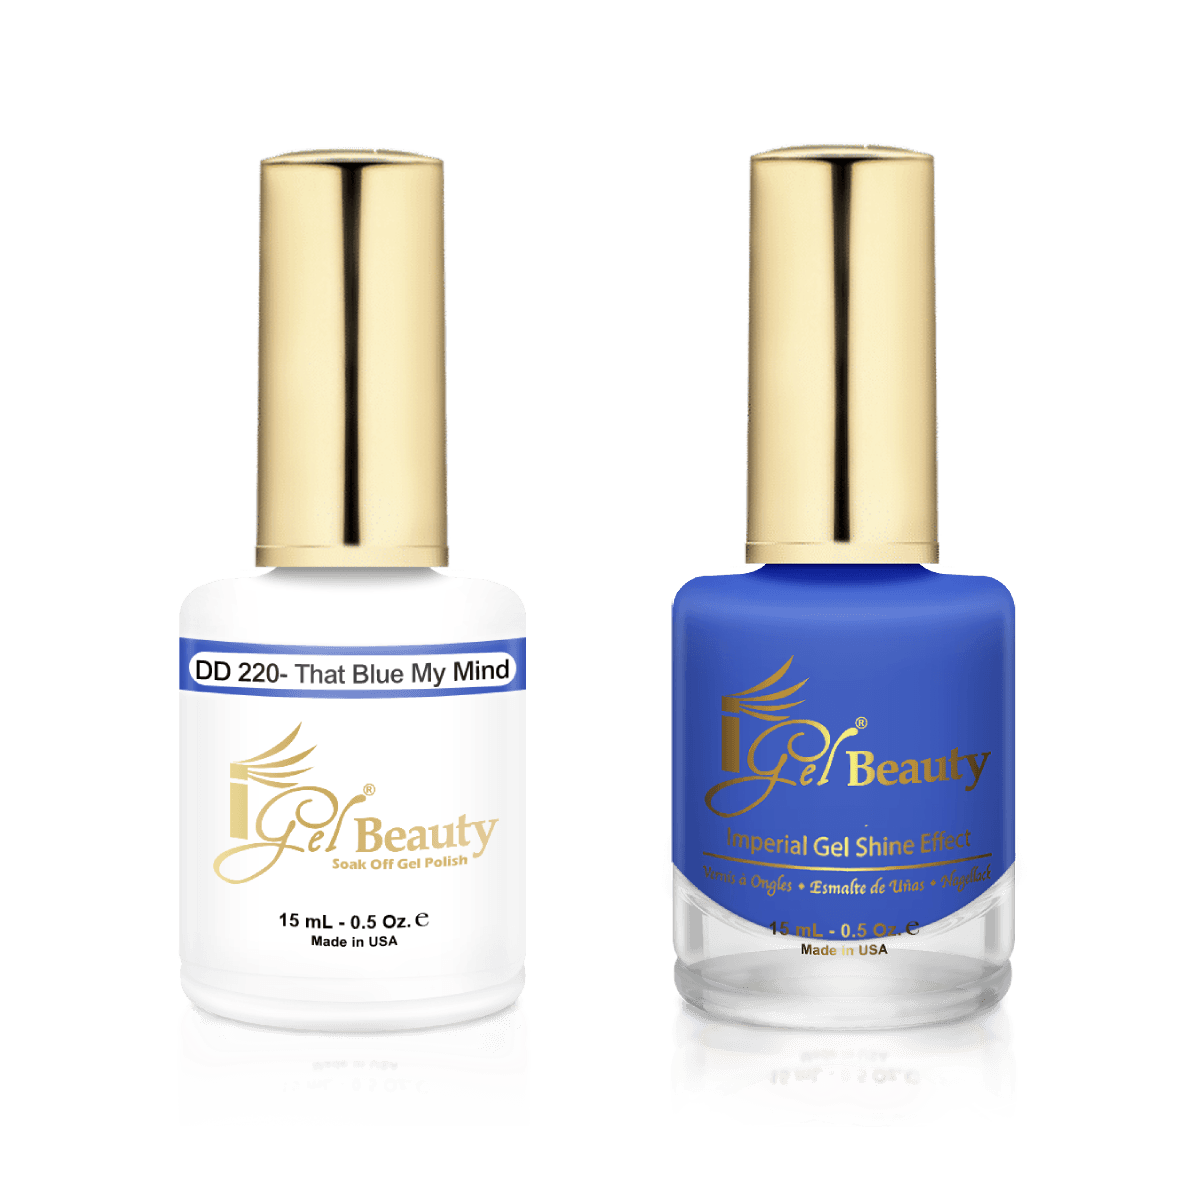 IGel Duo Gel Polish + Matching Nail Lacquer DD 220 THAT BLUE MY MIND